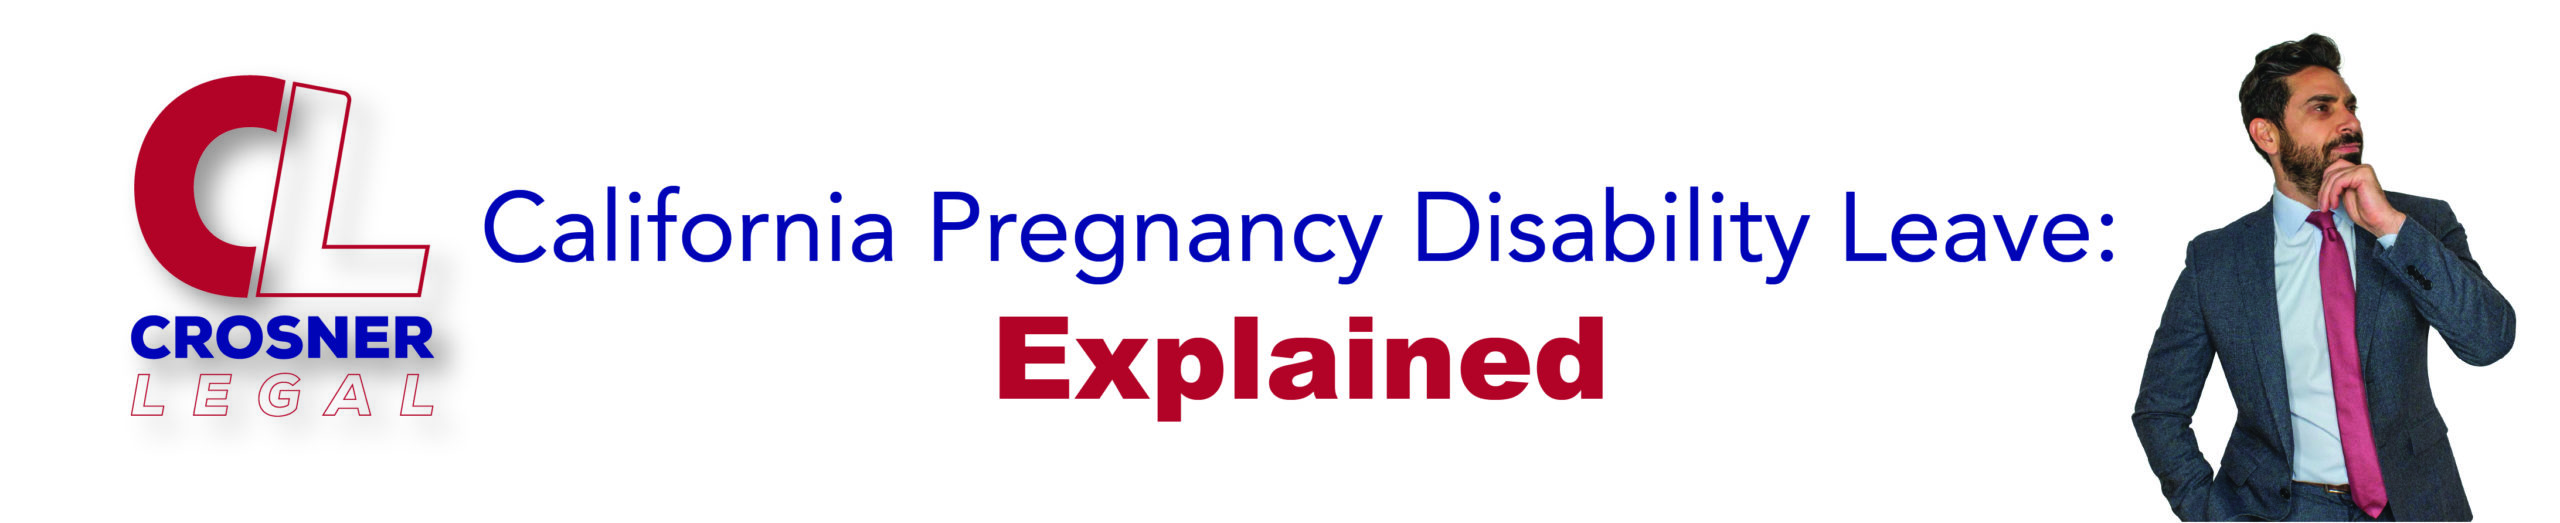 California Pregnancy Disability Leave: Explained